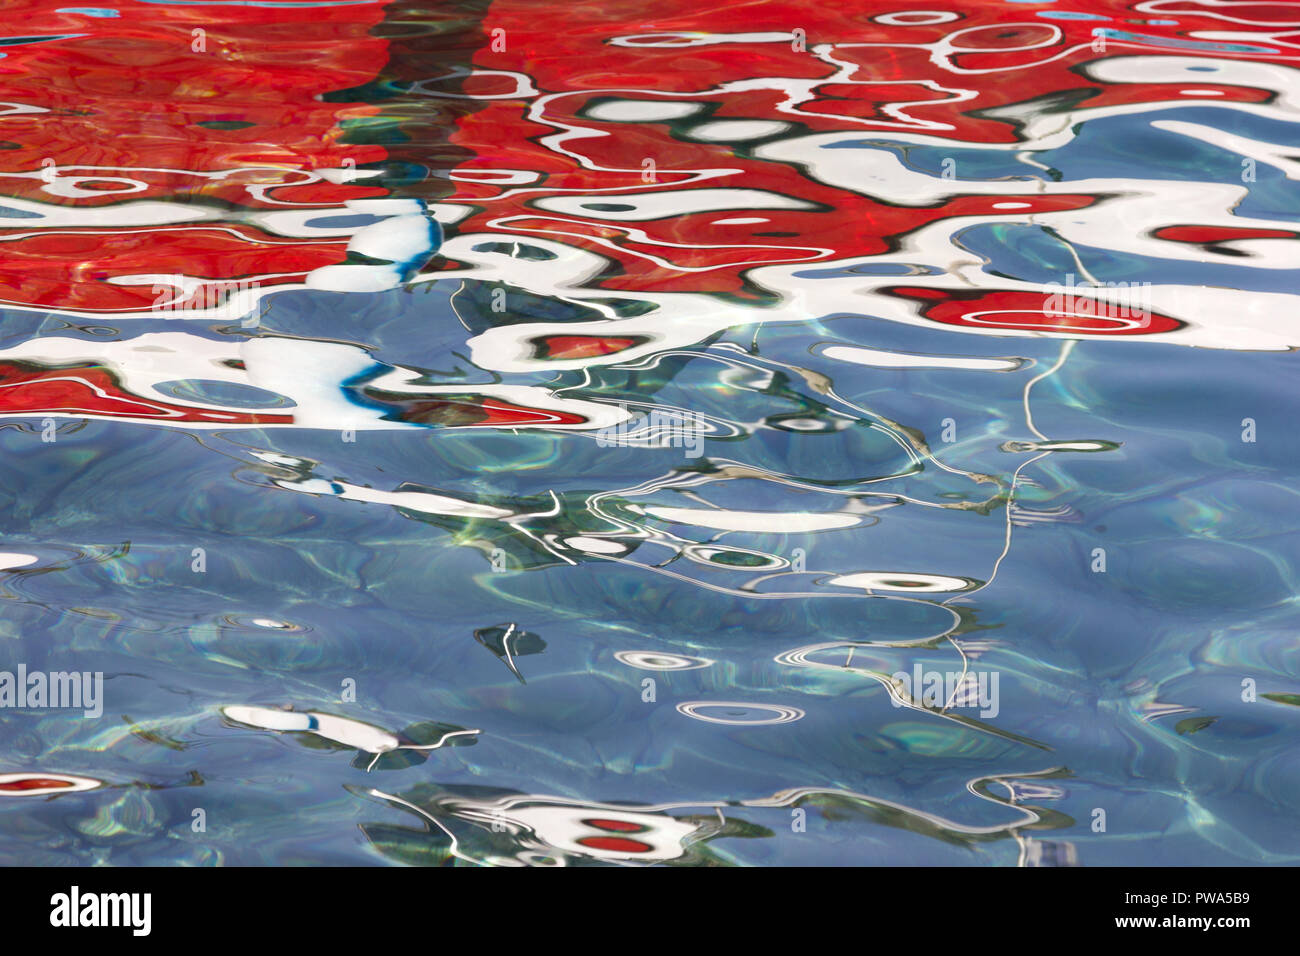 A abstract image of a red boat reflected in water Stock Photo